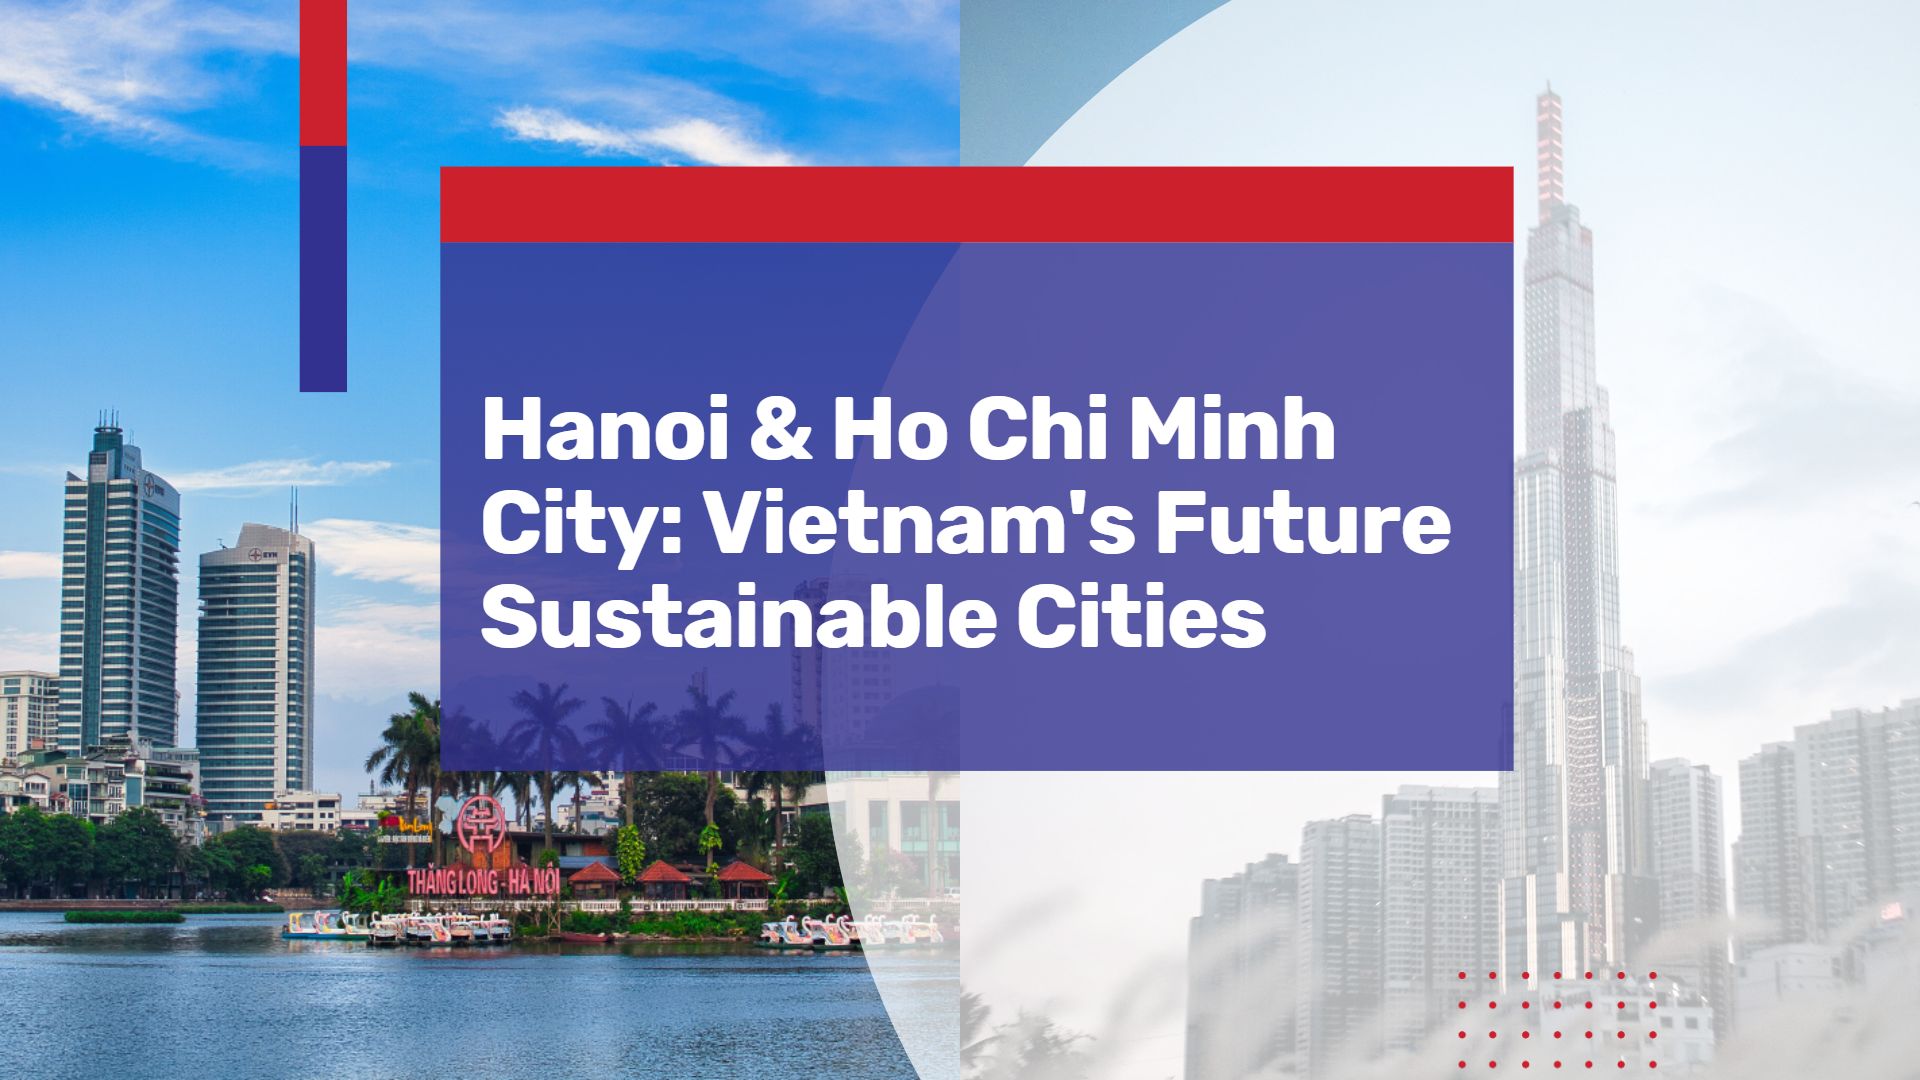 Hanoi and Ho Chi Minh City: Potential in Vietnam’s Future Sustainable Cities